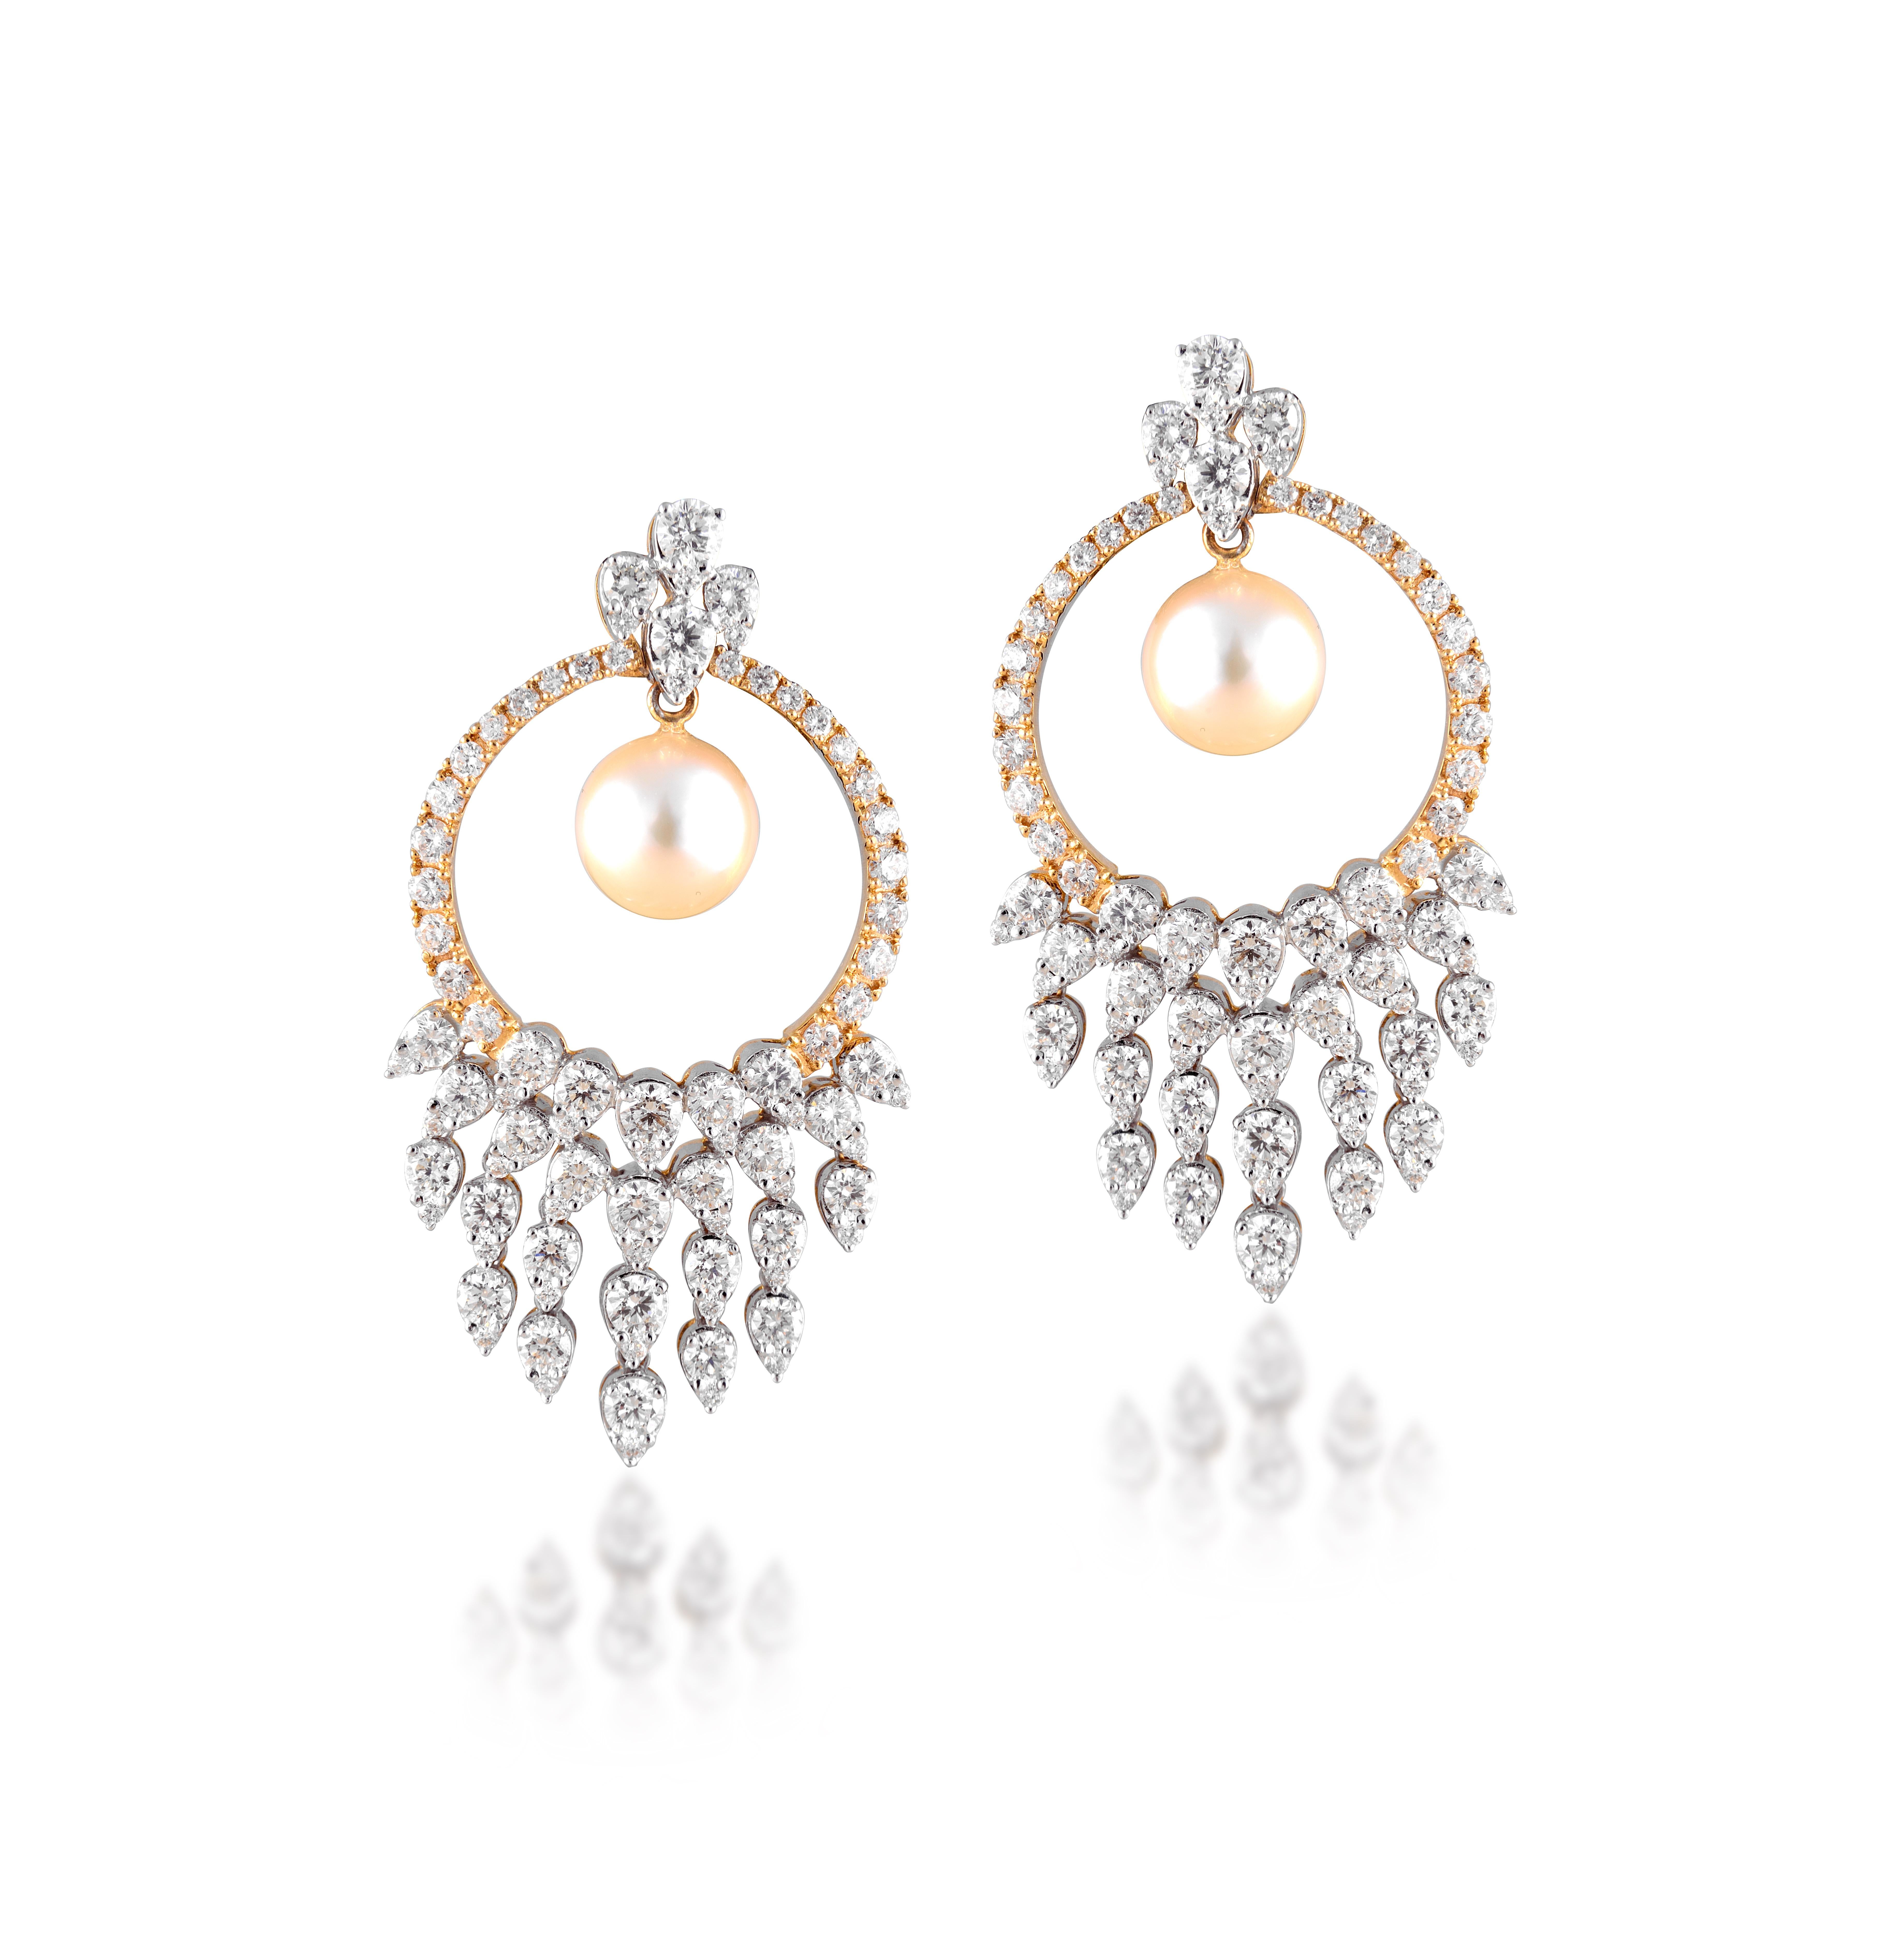 Mixed Cut 18 Karat Yellow Gold White Gold Pearl White Diamond Chandelier Earrings For Sale